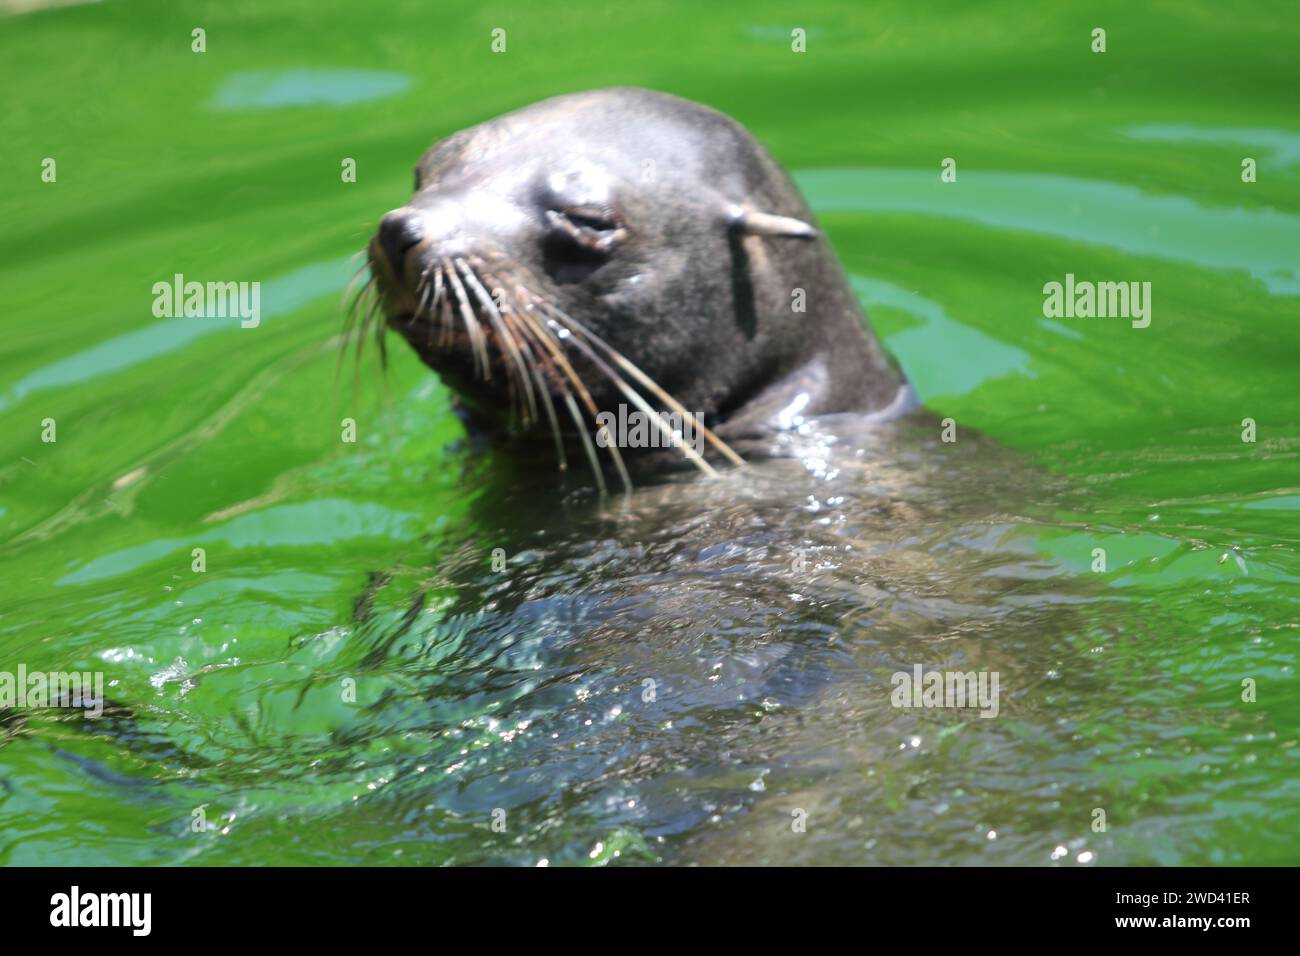 The brown fur seal (Arctocephalus pusillus), also known as the Cape fur seal, South African fur seal and the Australian fur seal is a species of fur s Stock Photo